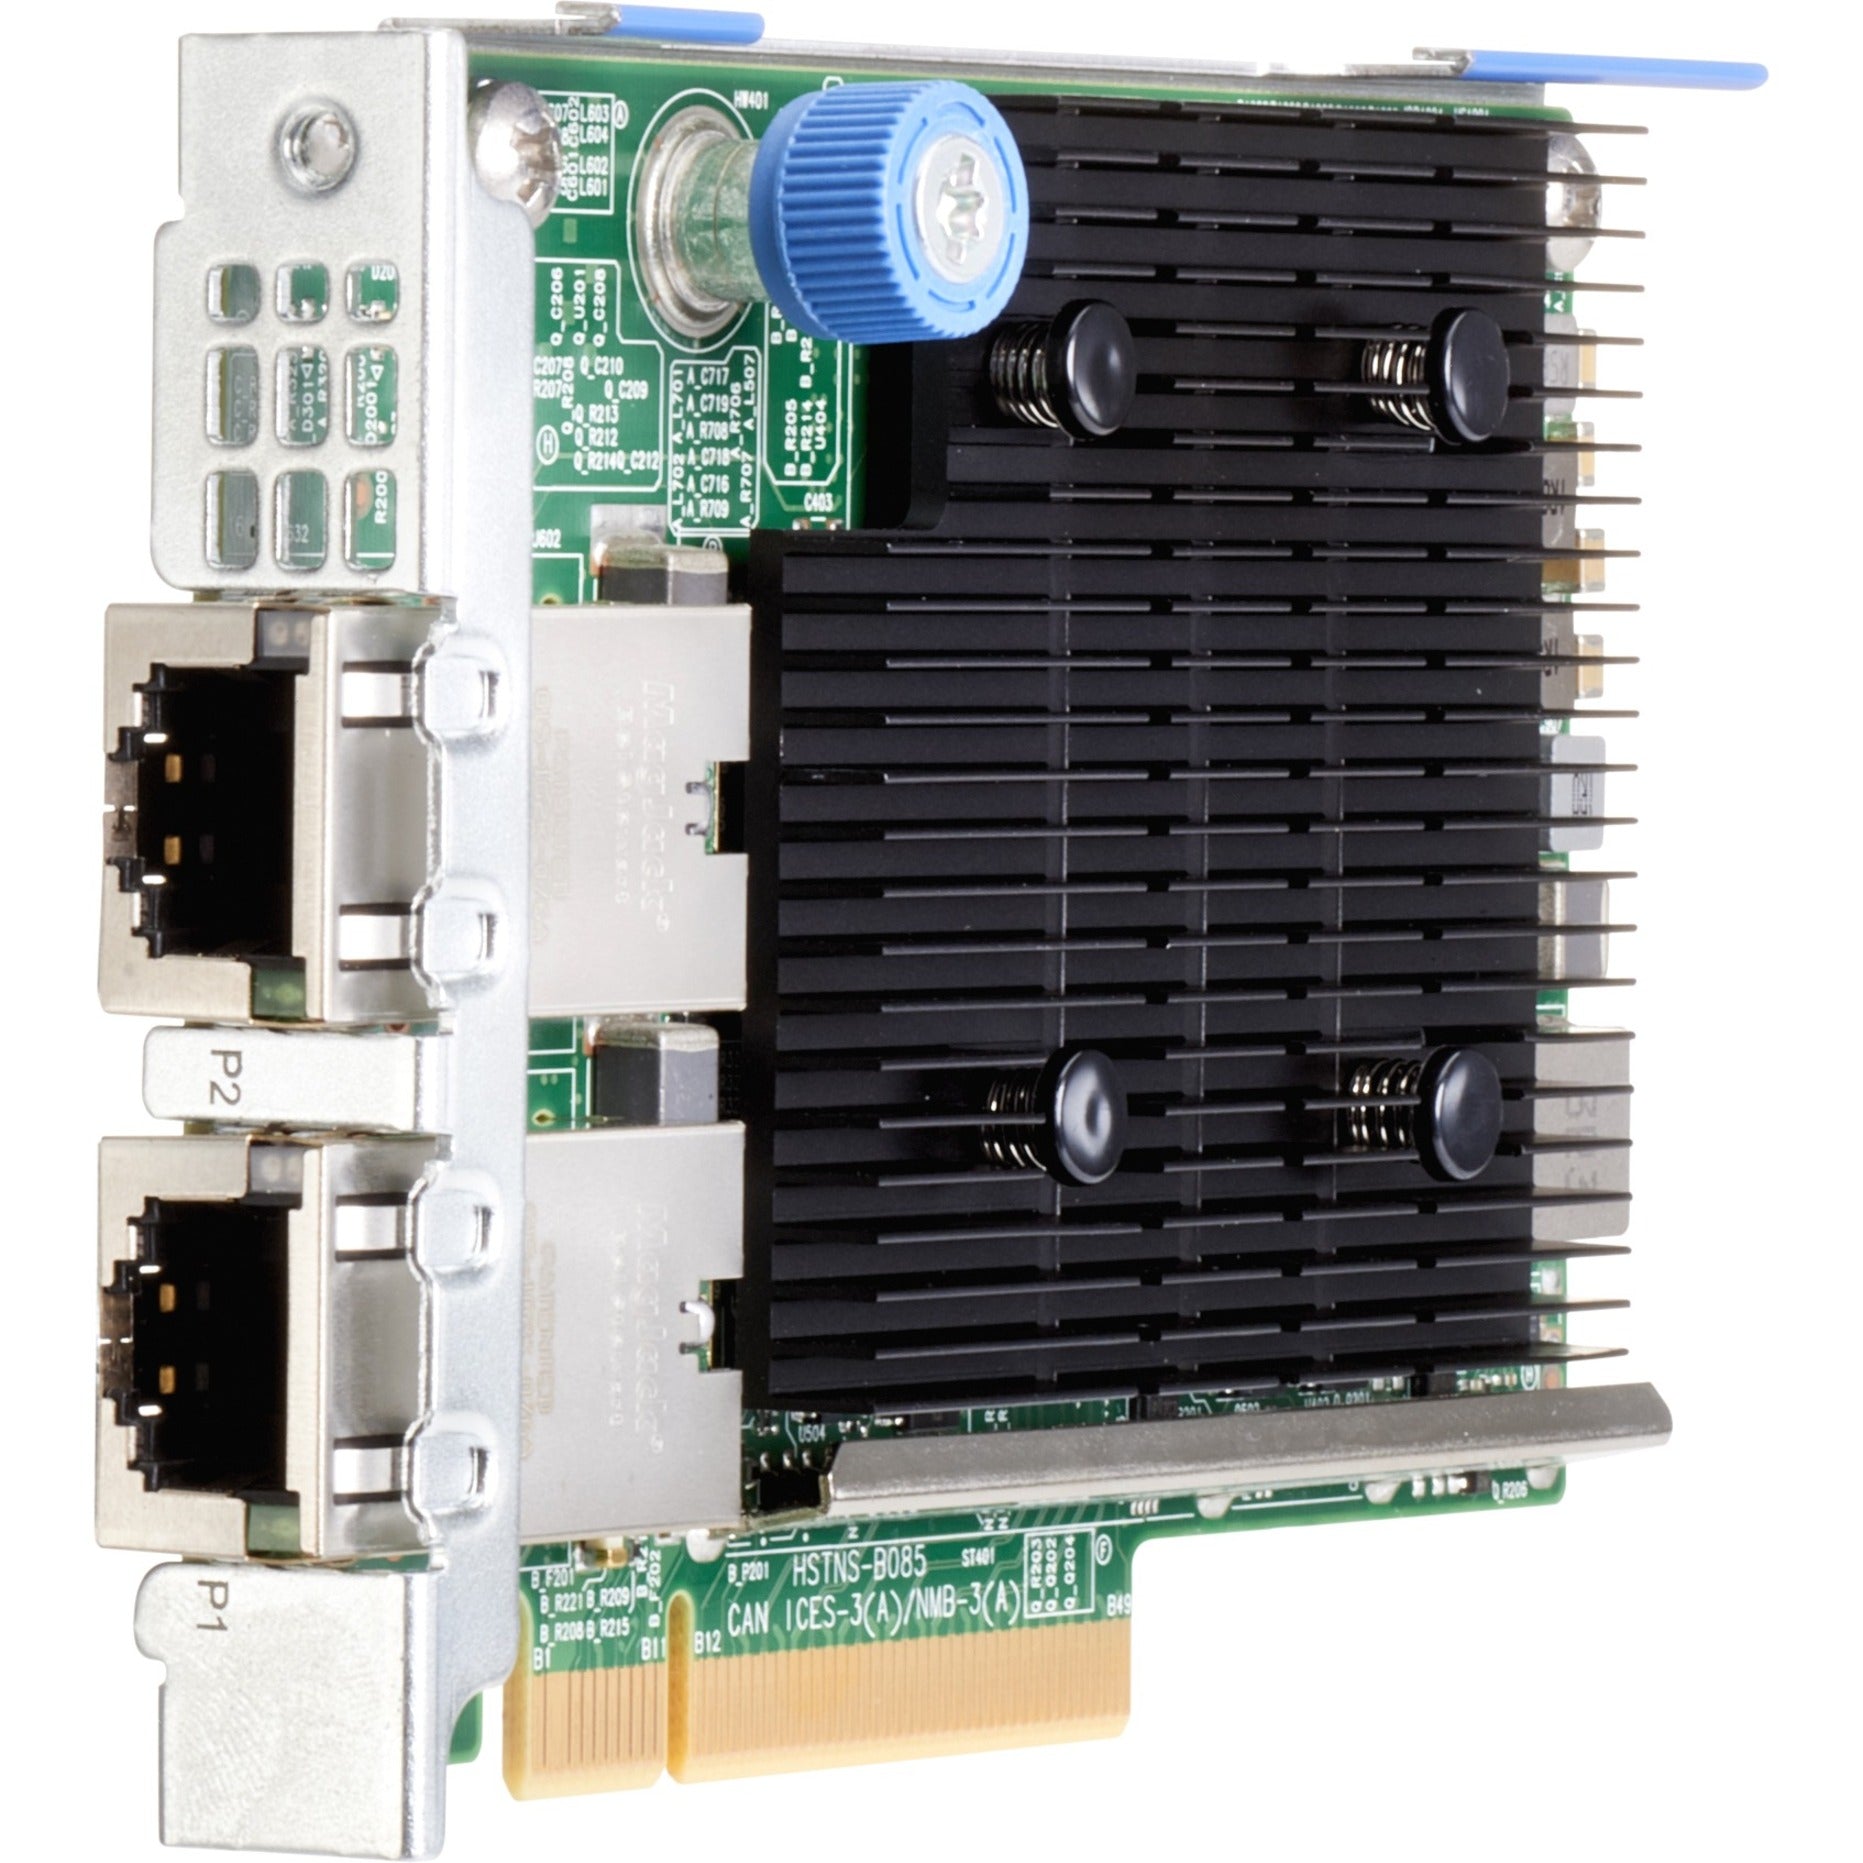 HPE 817721-B21 Ethernet 10Gb 2-port 535FLR-T Adapter, PCI Express 3.0 x8, Twisted Pair